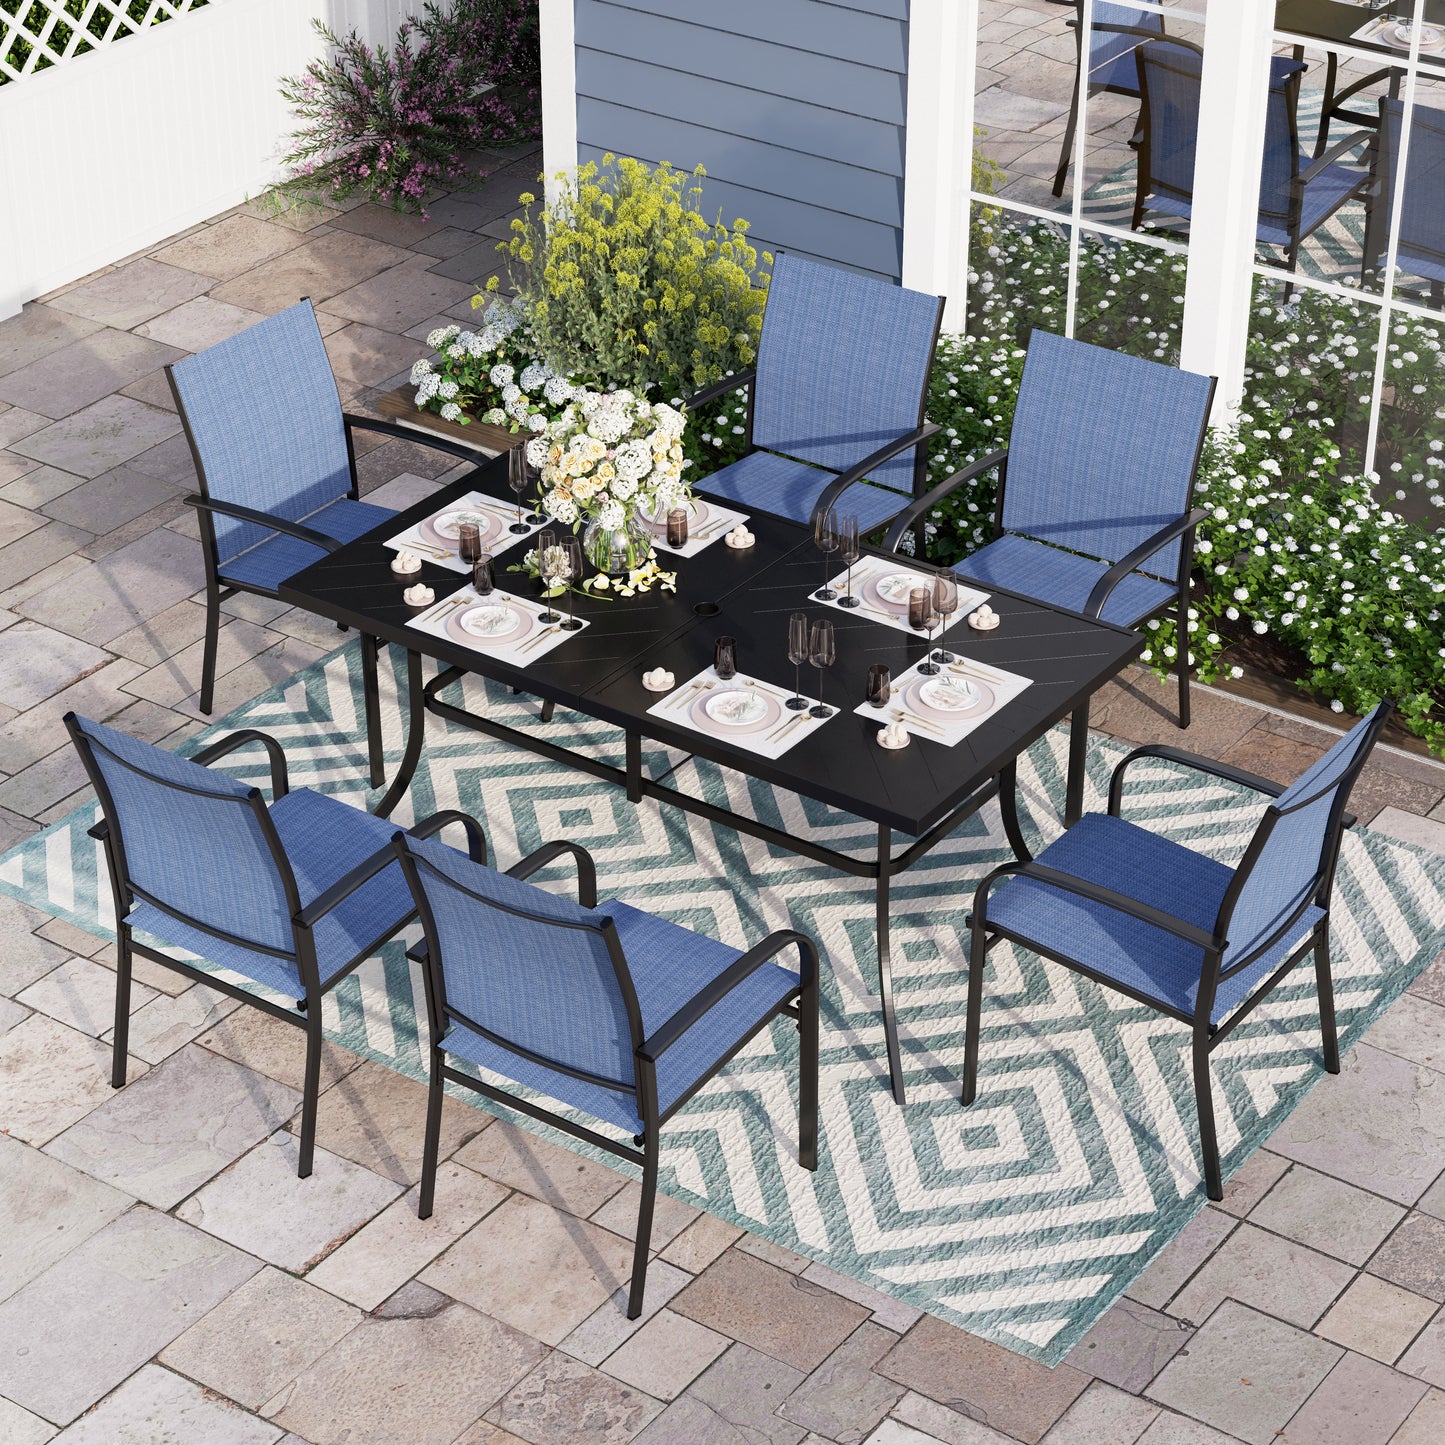 Sophia & William 7 Piece Patio Metal Dining Set Rectangular Table and 6 Blue Textilene Chairs